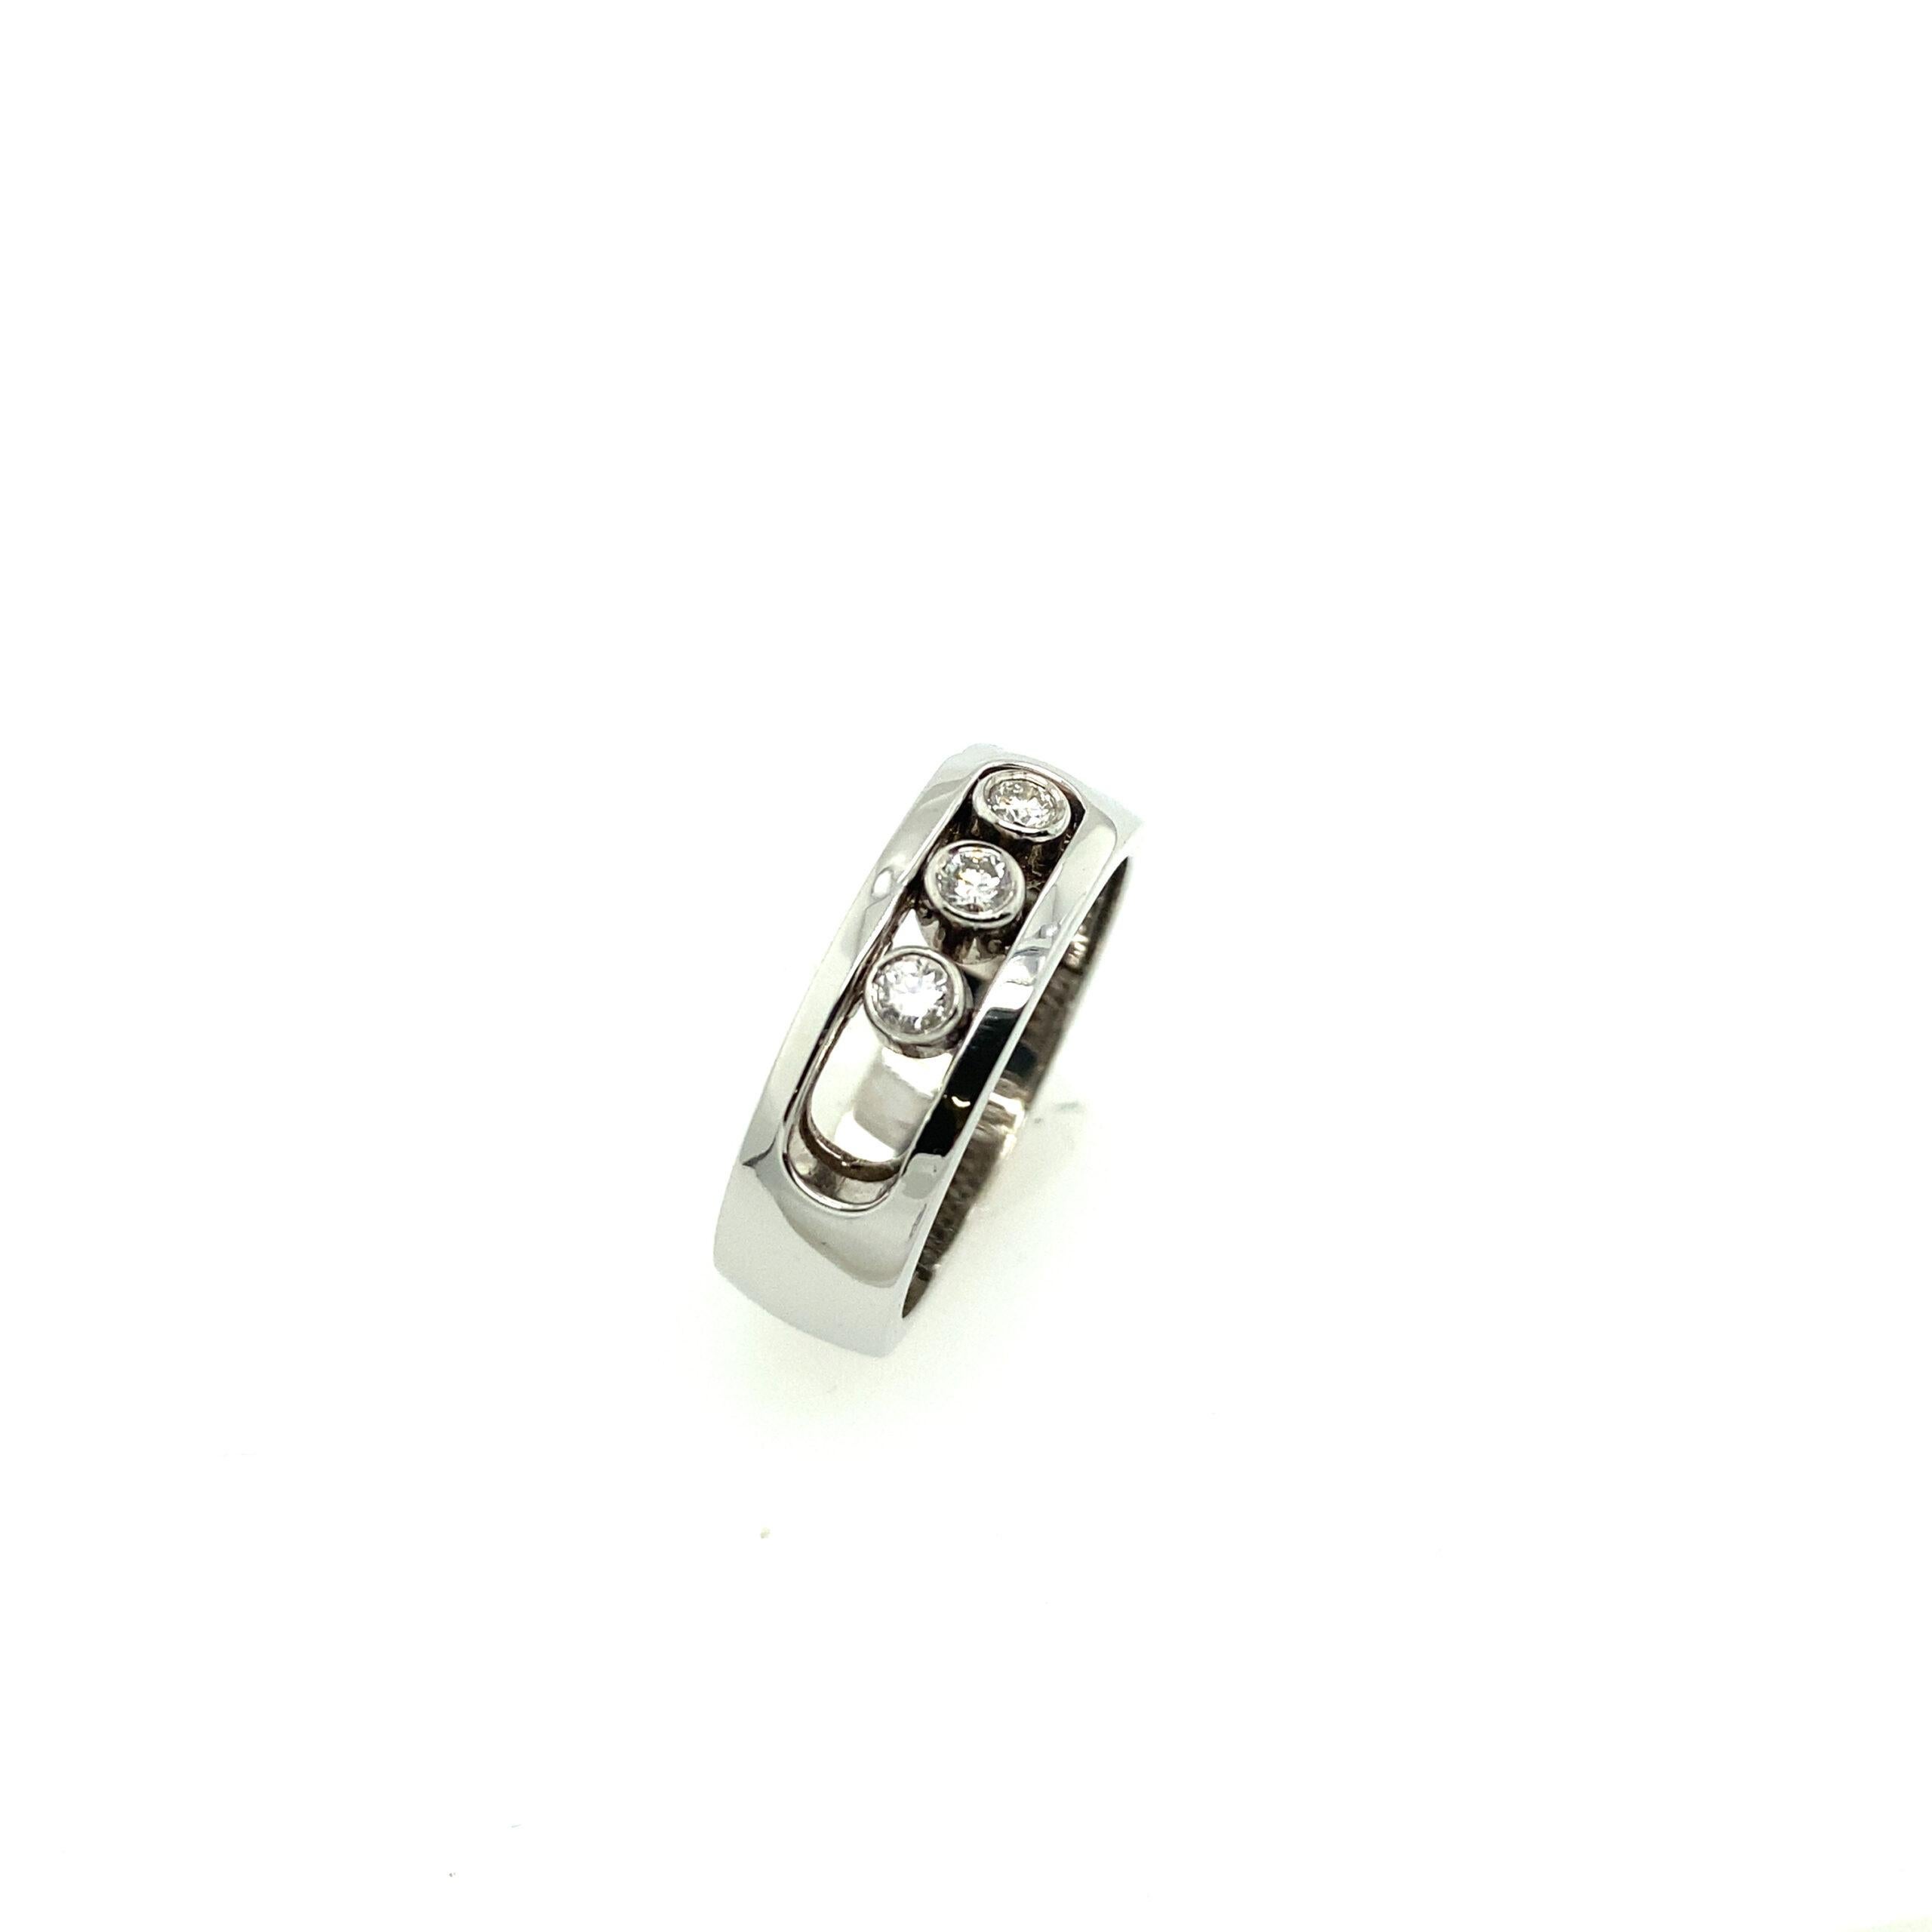 New 14ct White Gold 6mm Wide Band With 3 Sliding Diamonds

Additional Information:
Total Diamond Weight: 0.15ct
Diamond Colour: G/H
Diamond Clarity: SI
Ring Width: 6mm
Total Weight: 4.6g
Finger Size: L 1/2
SMS2104